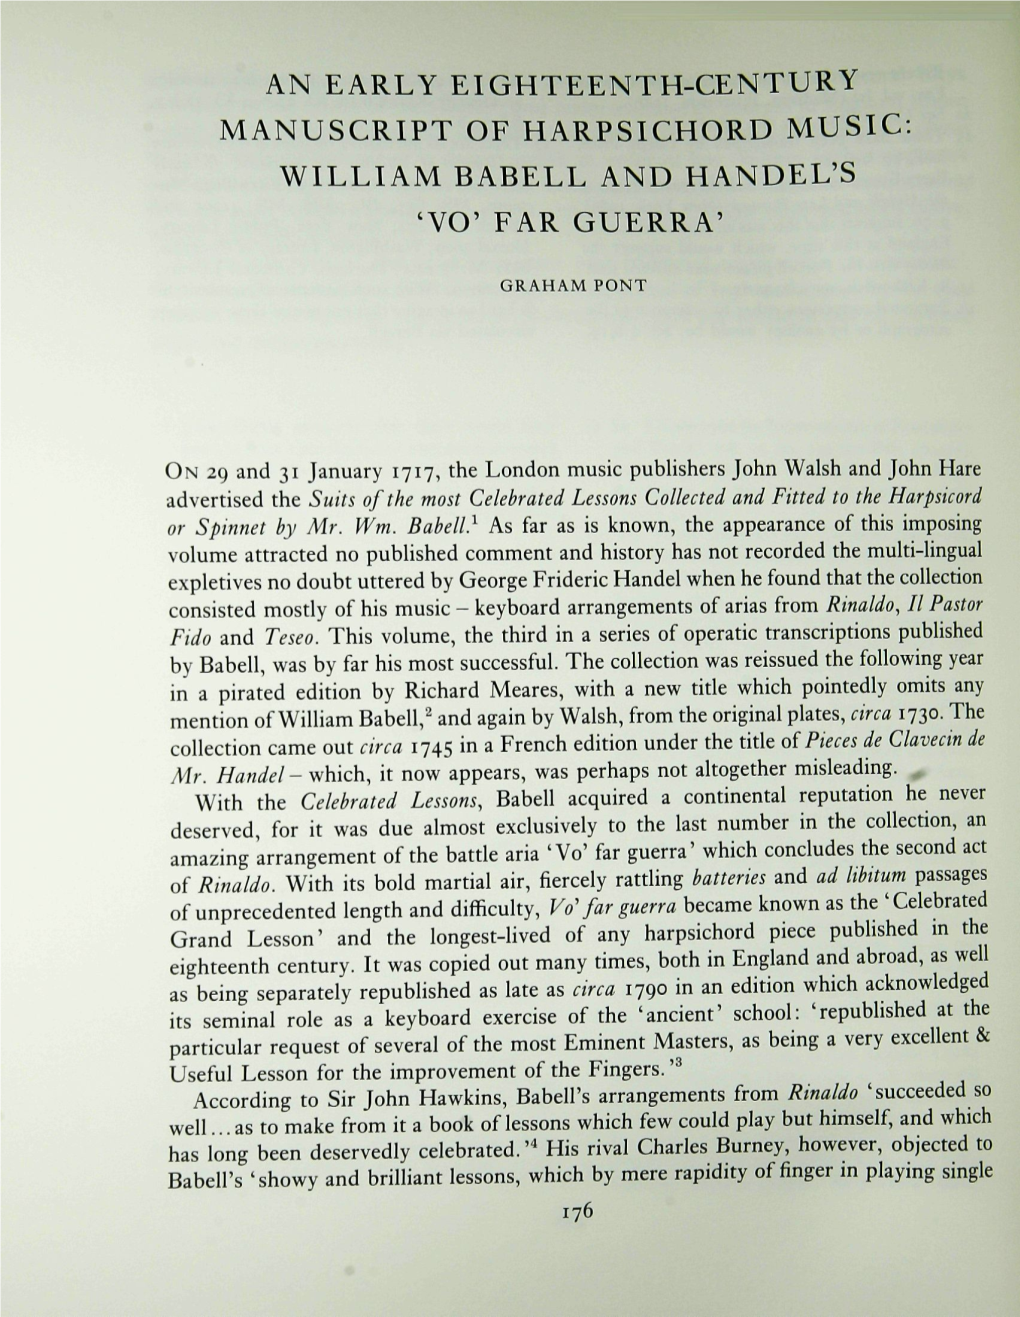 William Babell and Handel's 'Vo' Far Guerra'